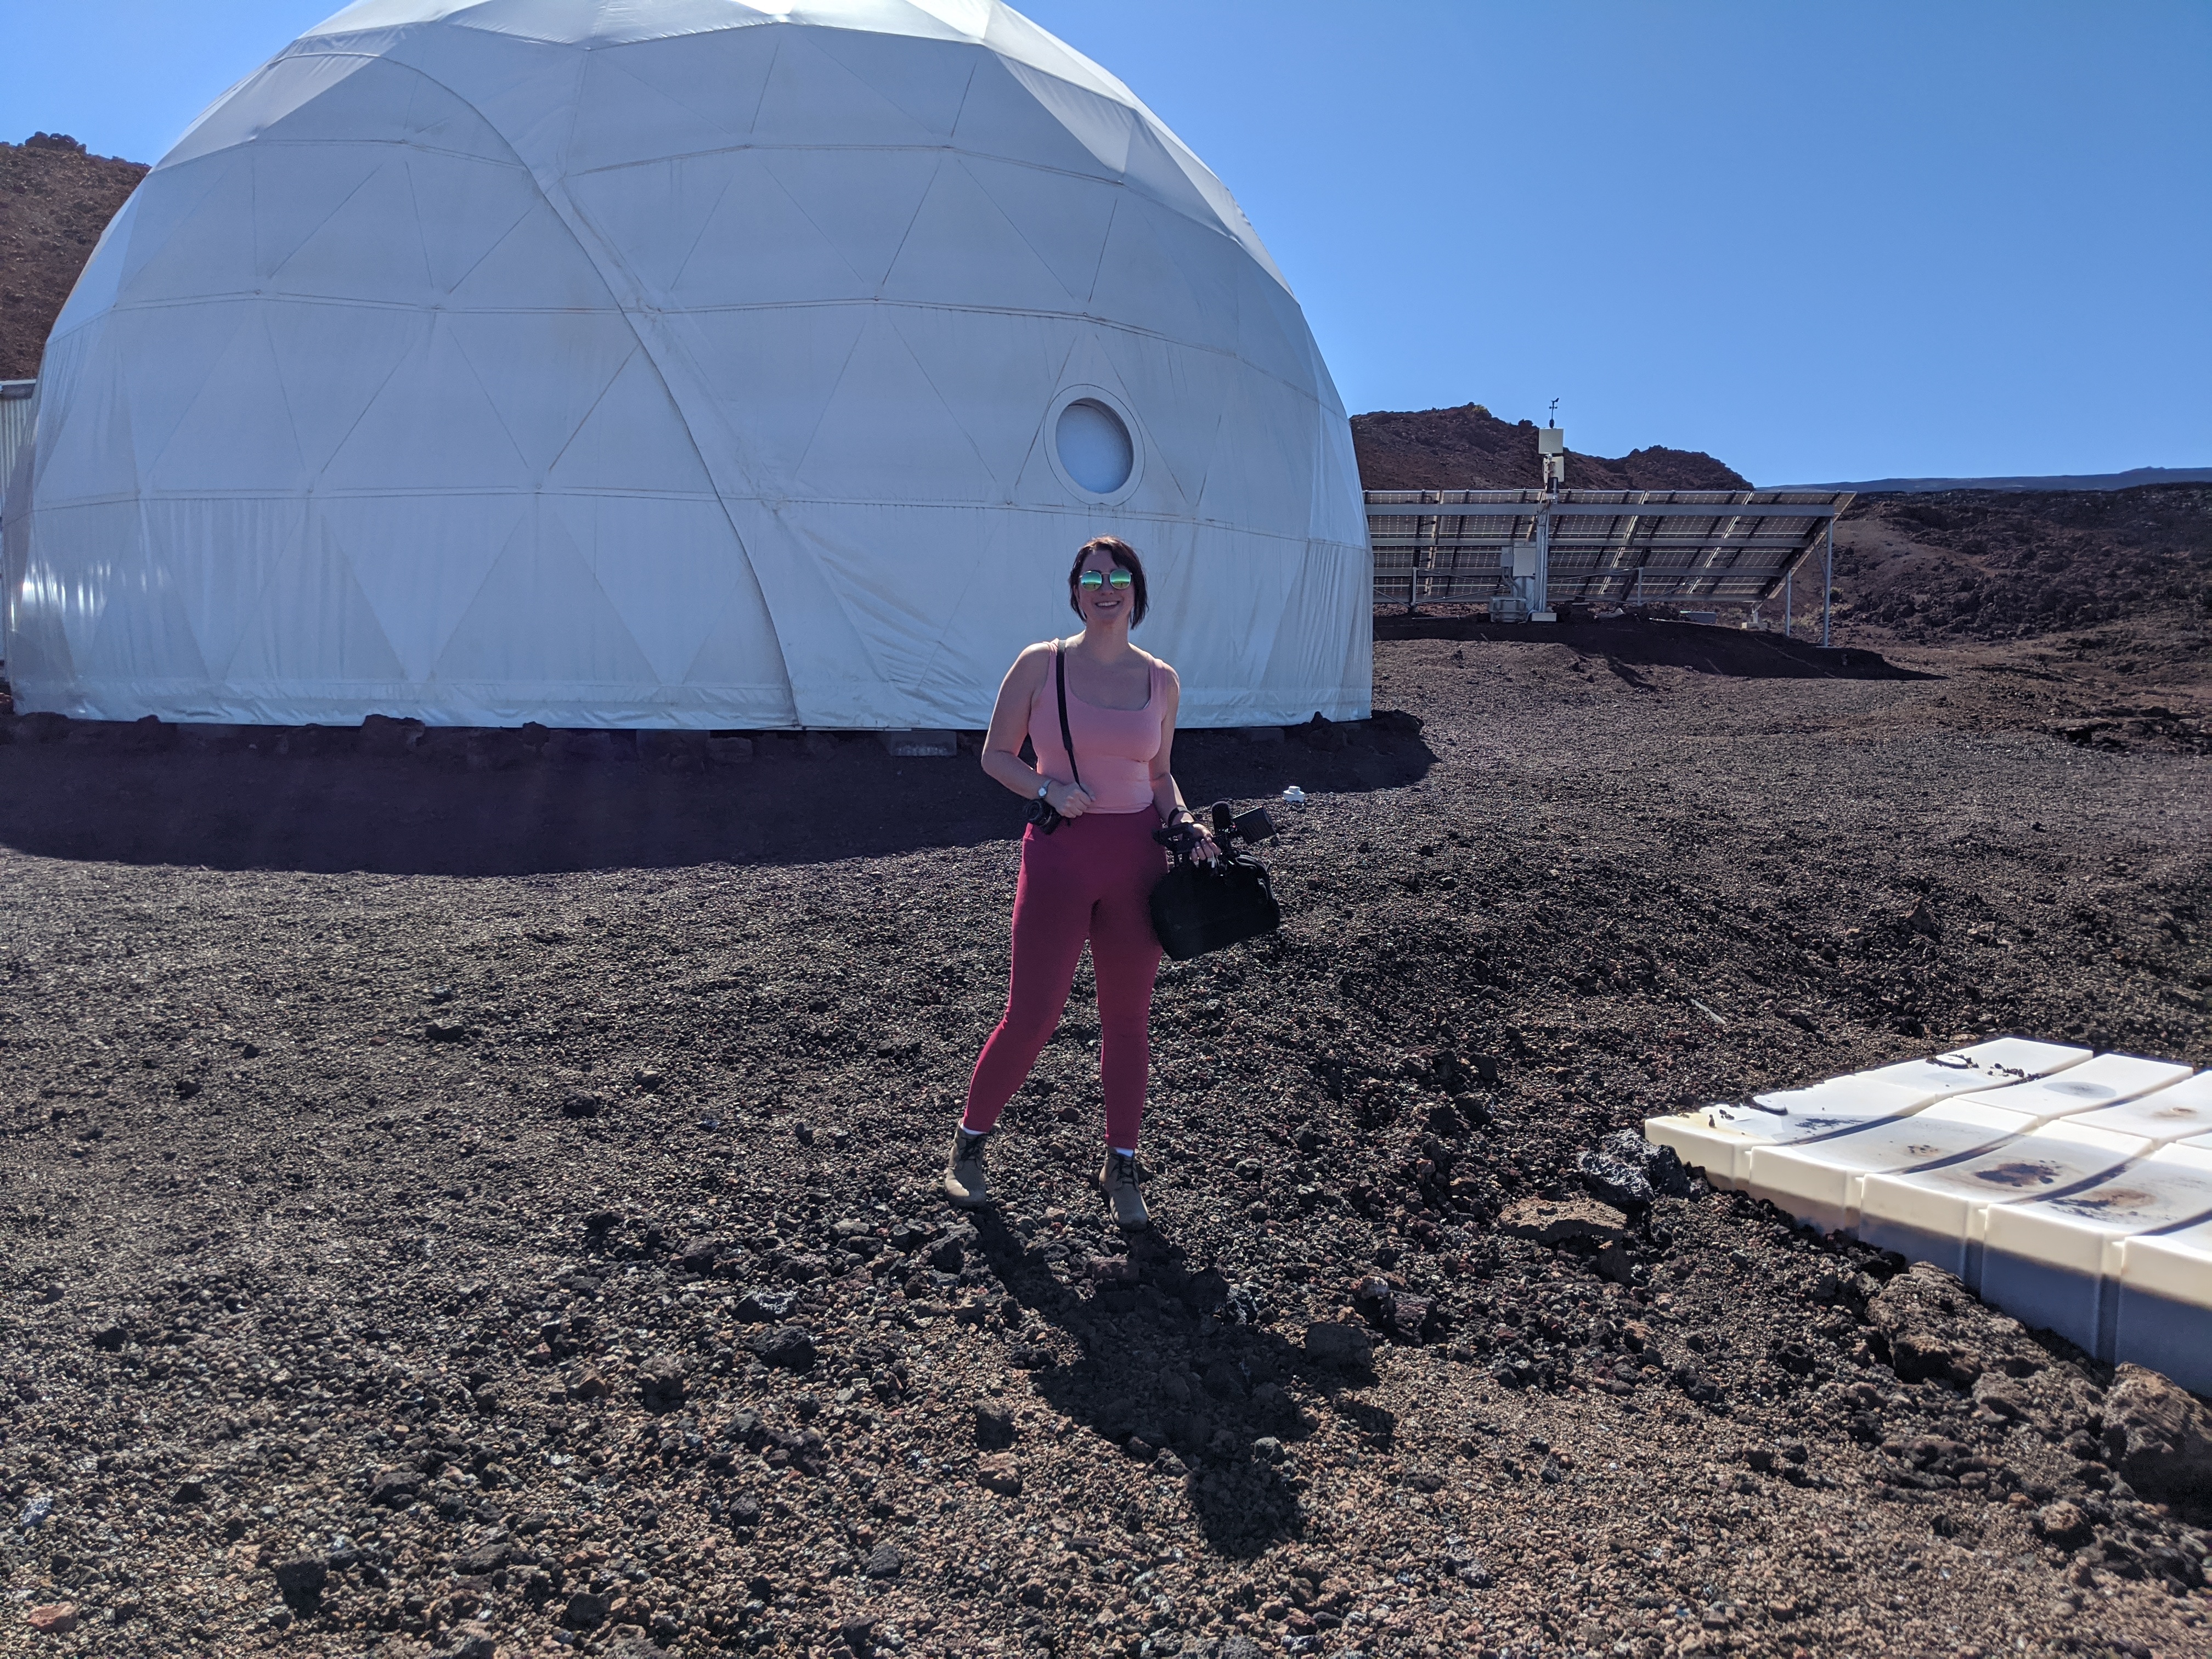 Space.com's Chelsea Gohd visited the HI-SEAS habitat in January, 2020 and, in November, 2020 will be joining a crew for a two-week analog Mars mission at the habitat.